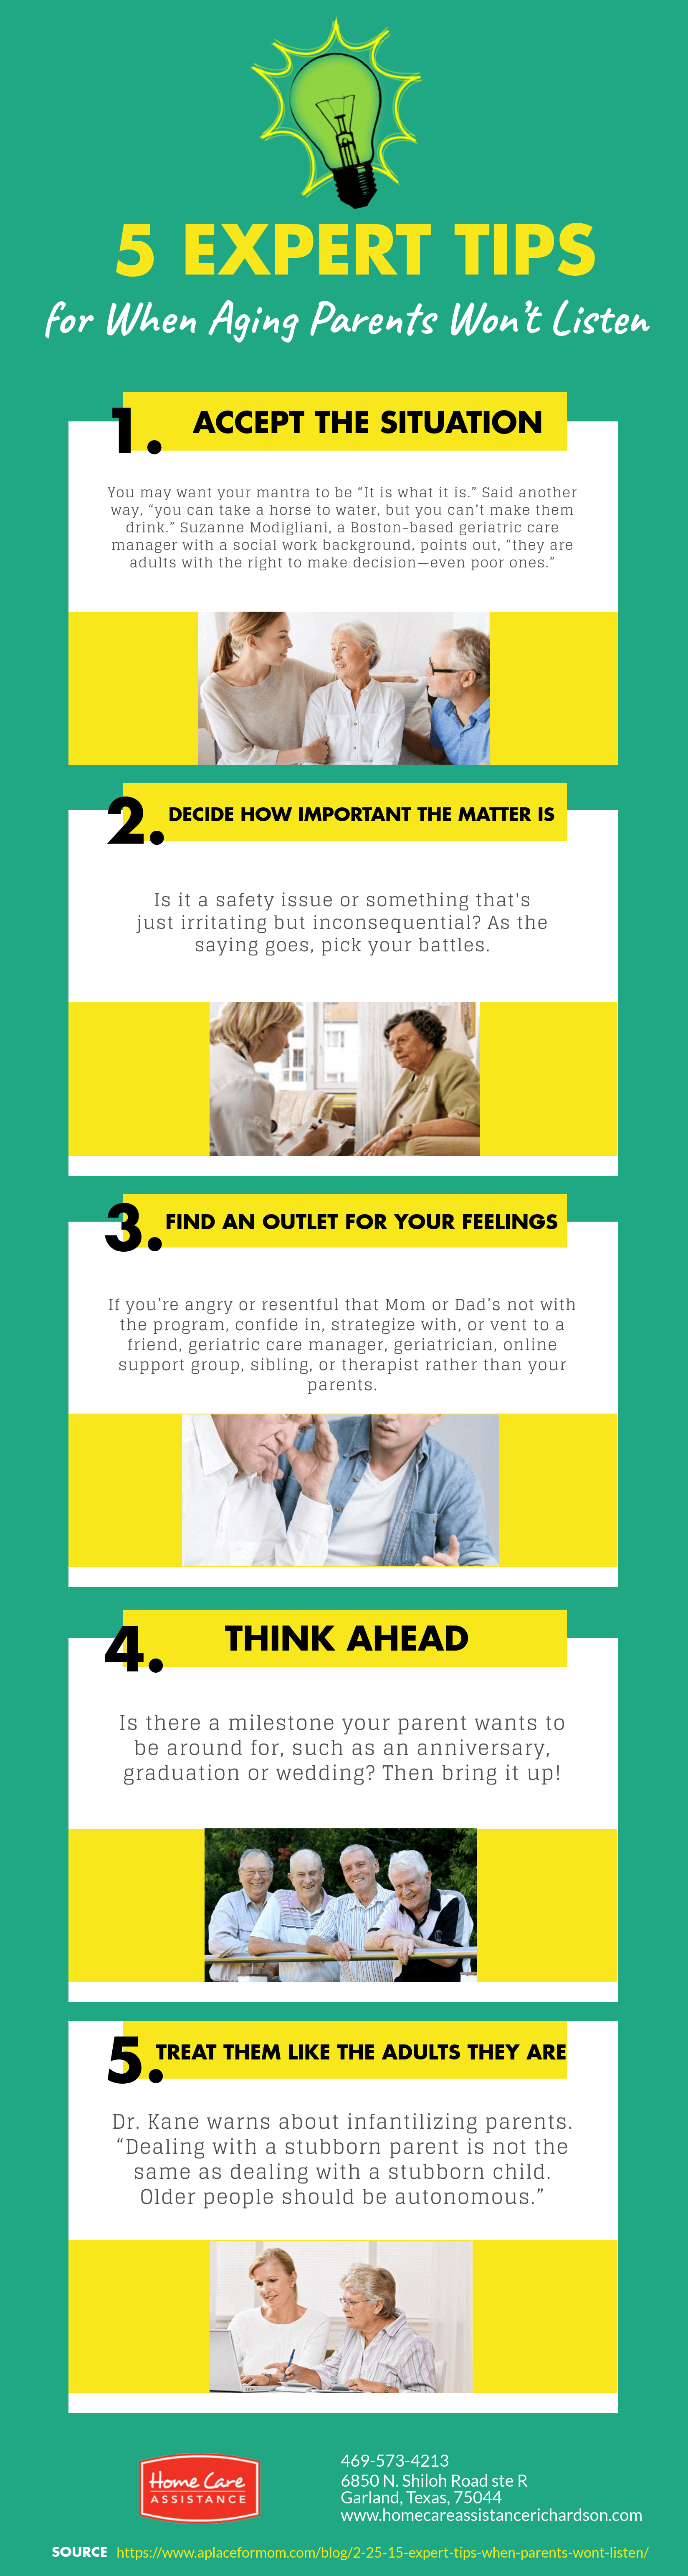 5 Expert Tips for When Aging Parents Won’t Listen [Infographic]